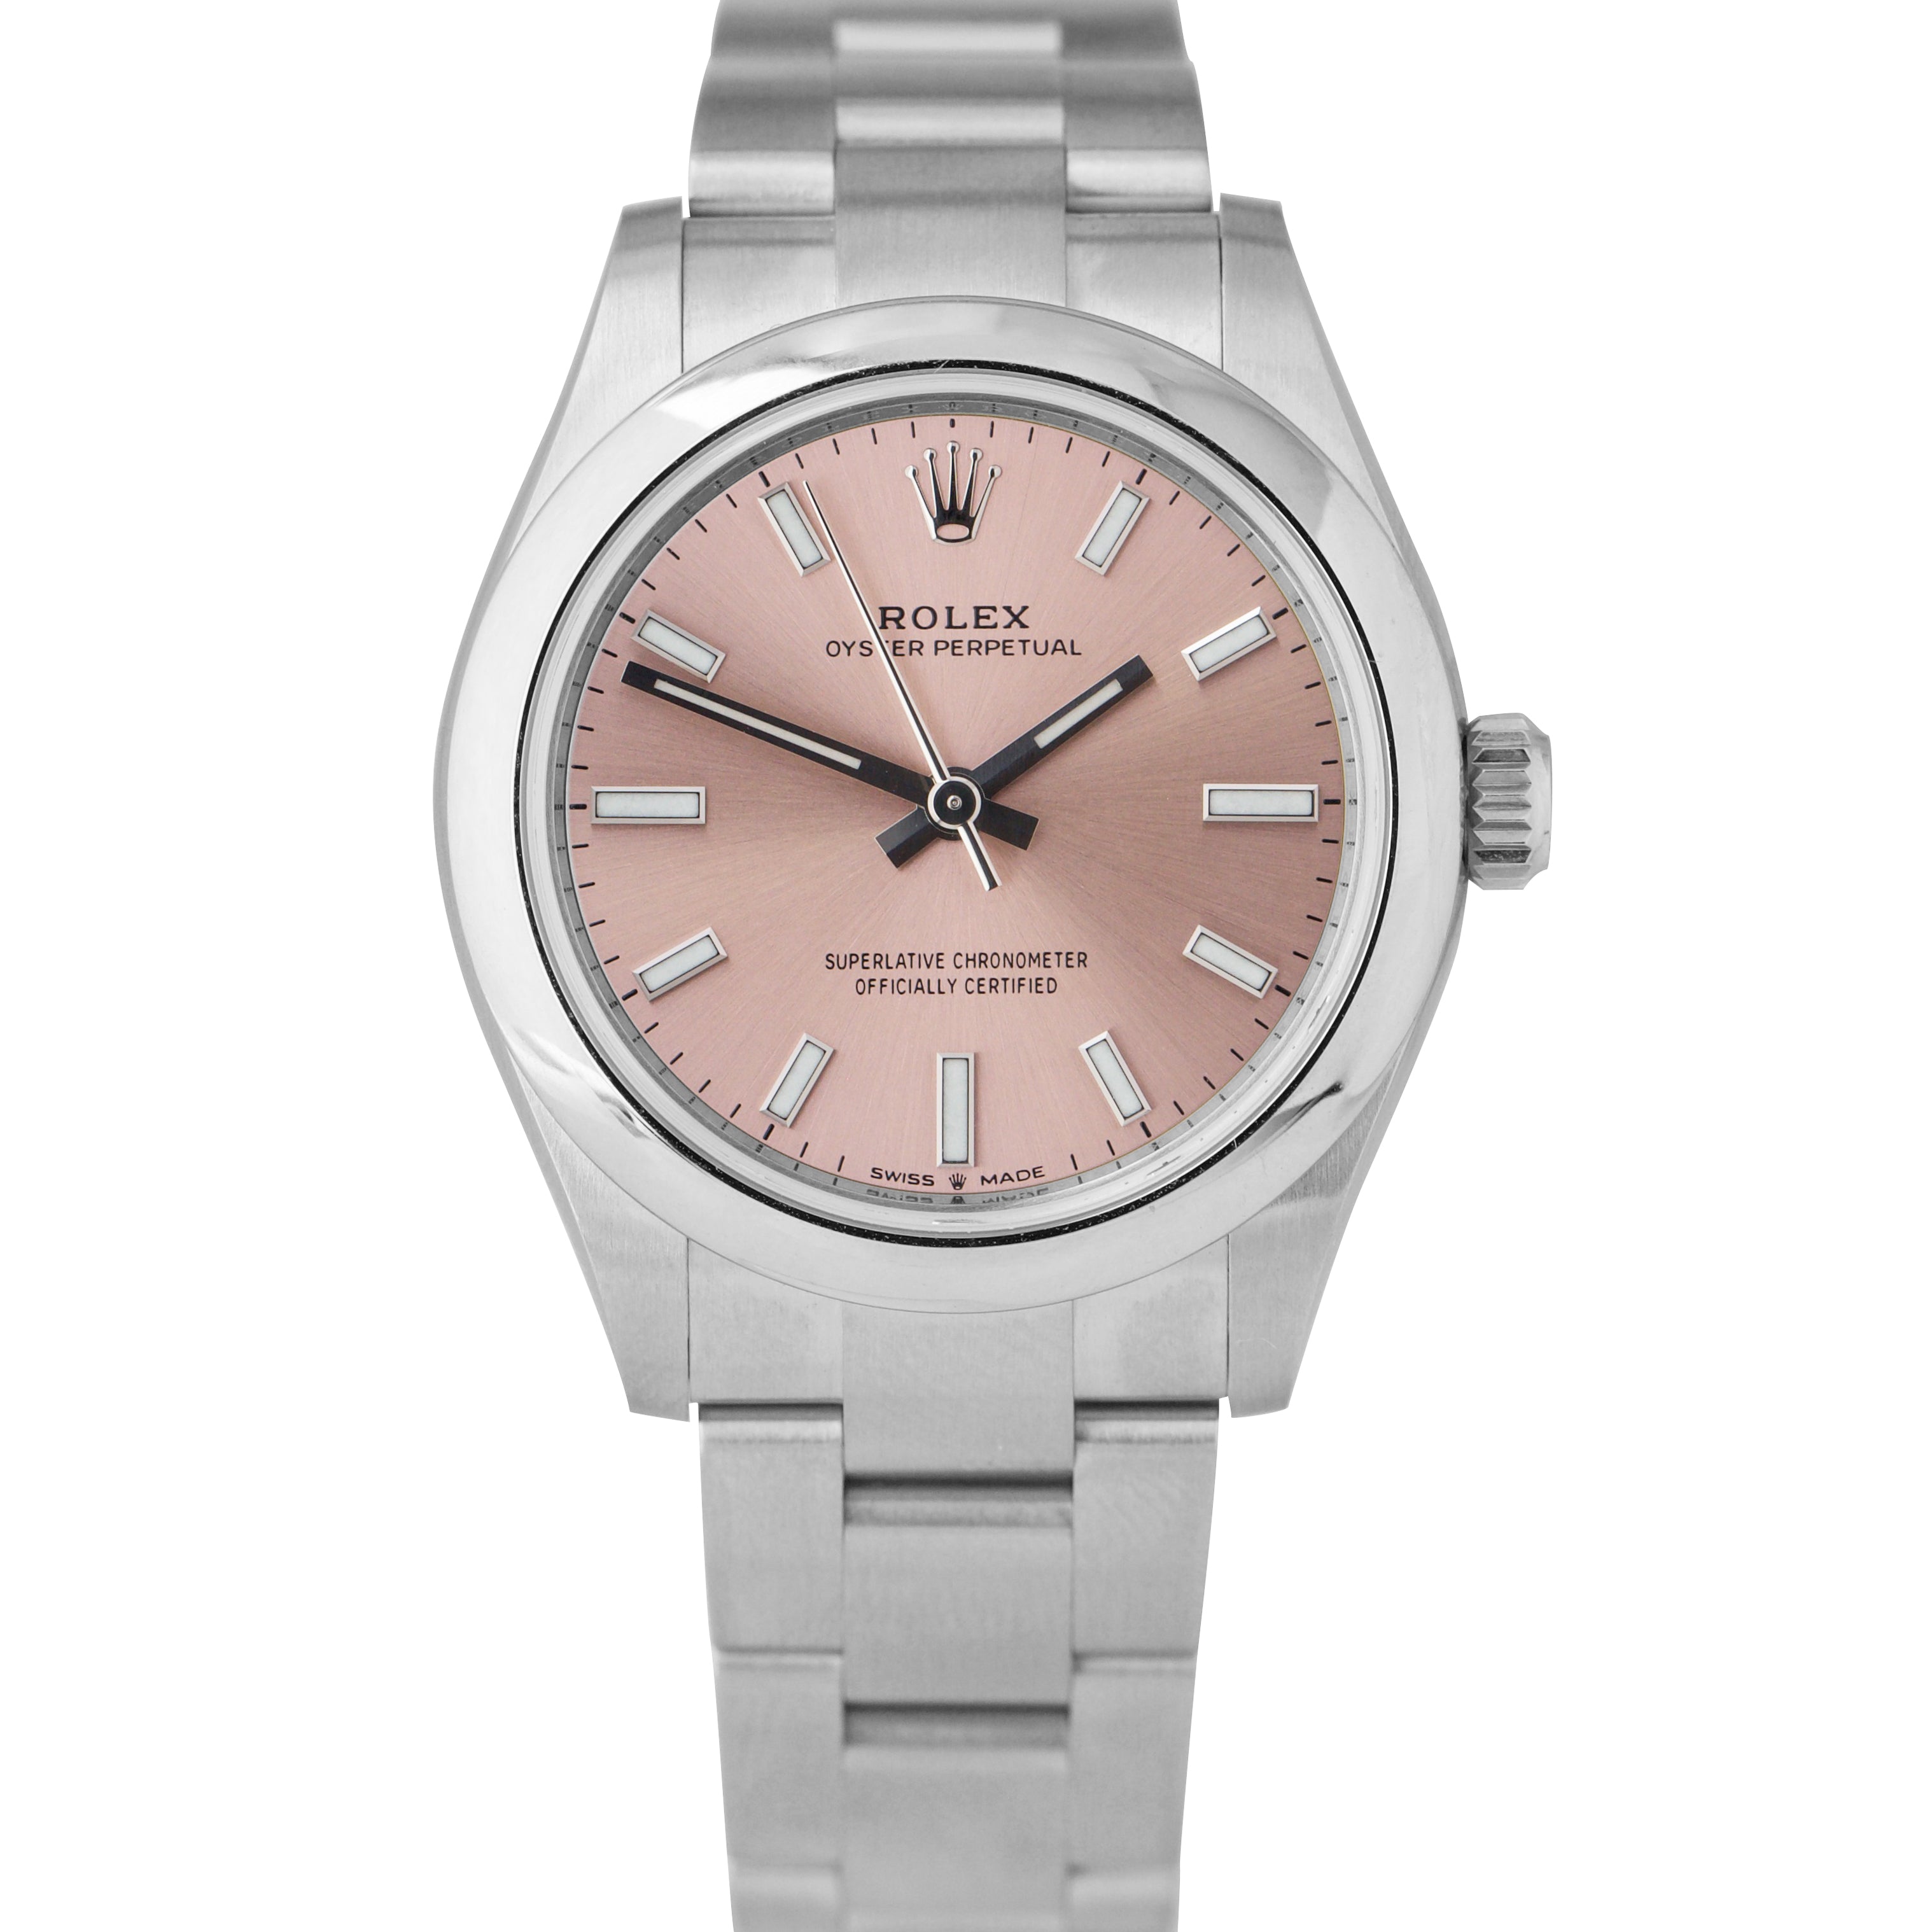 NEW MARCH 2022 Rolex Oyster Perpetual Midsize Pink Sunburst 31mm Watch 277200